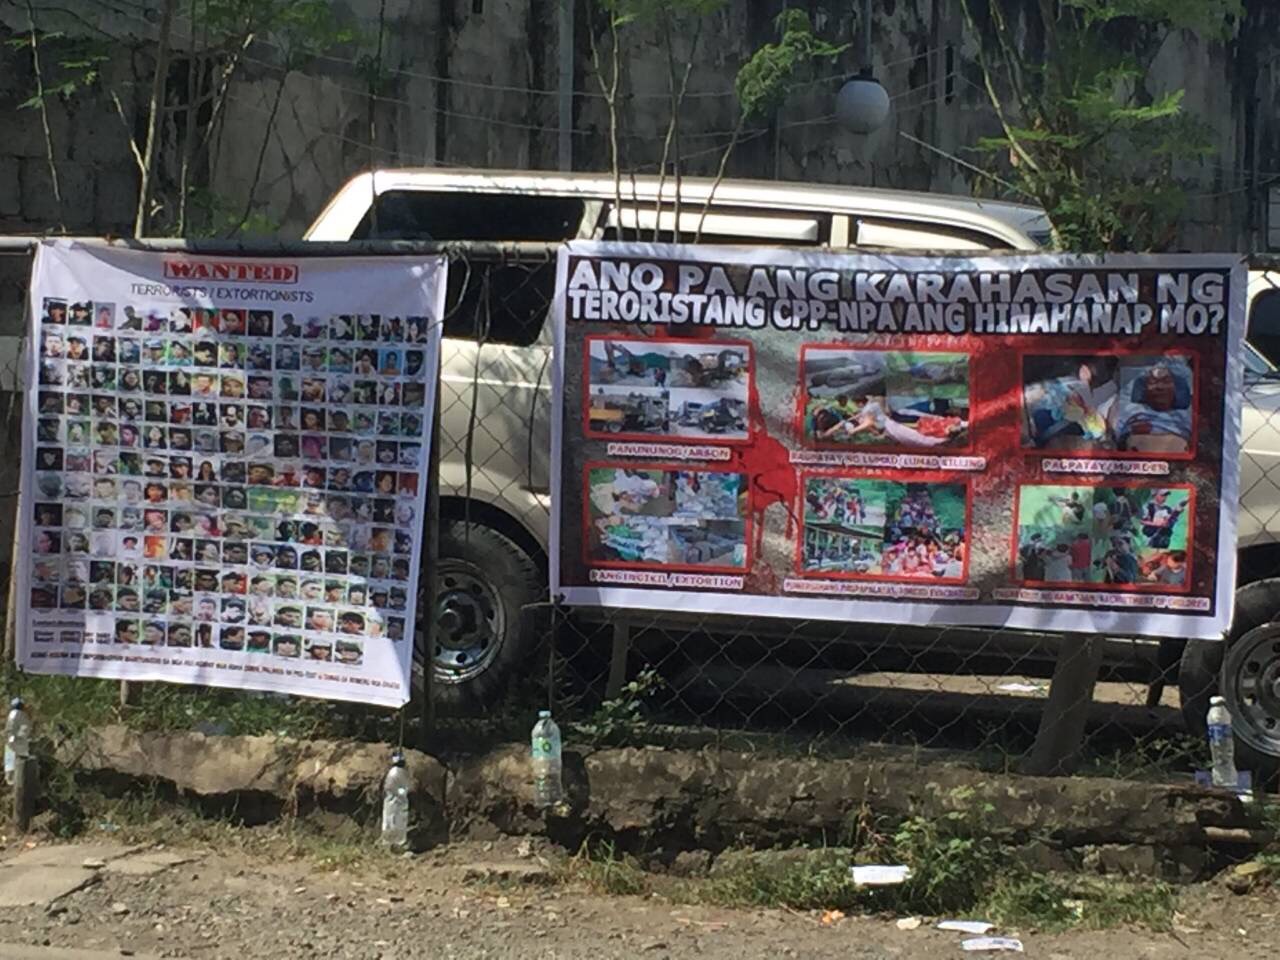 Photos of tarpaulins/pamphlets in Cagayan de Oro from Rep. Zarate's office